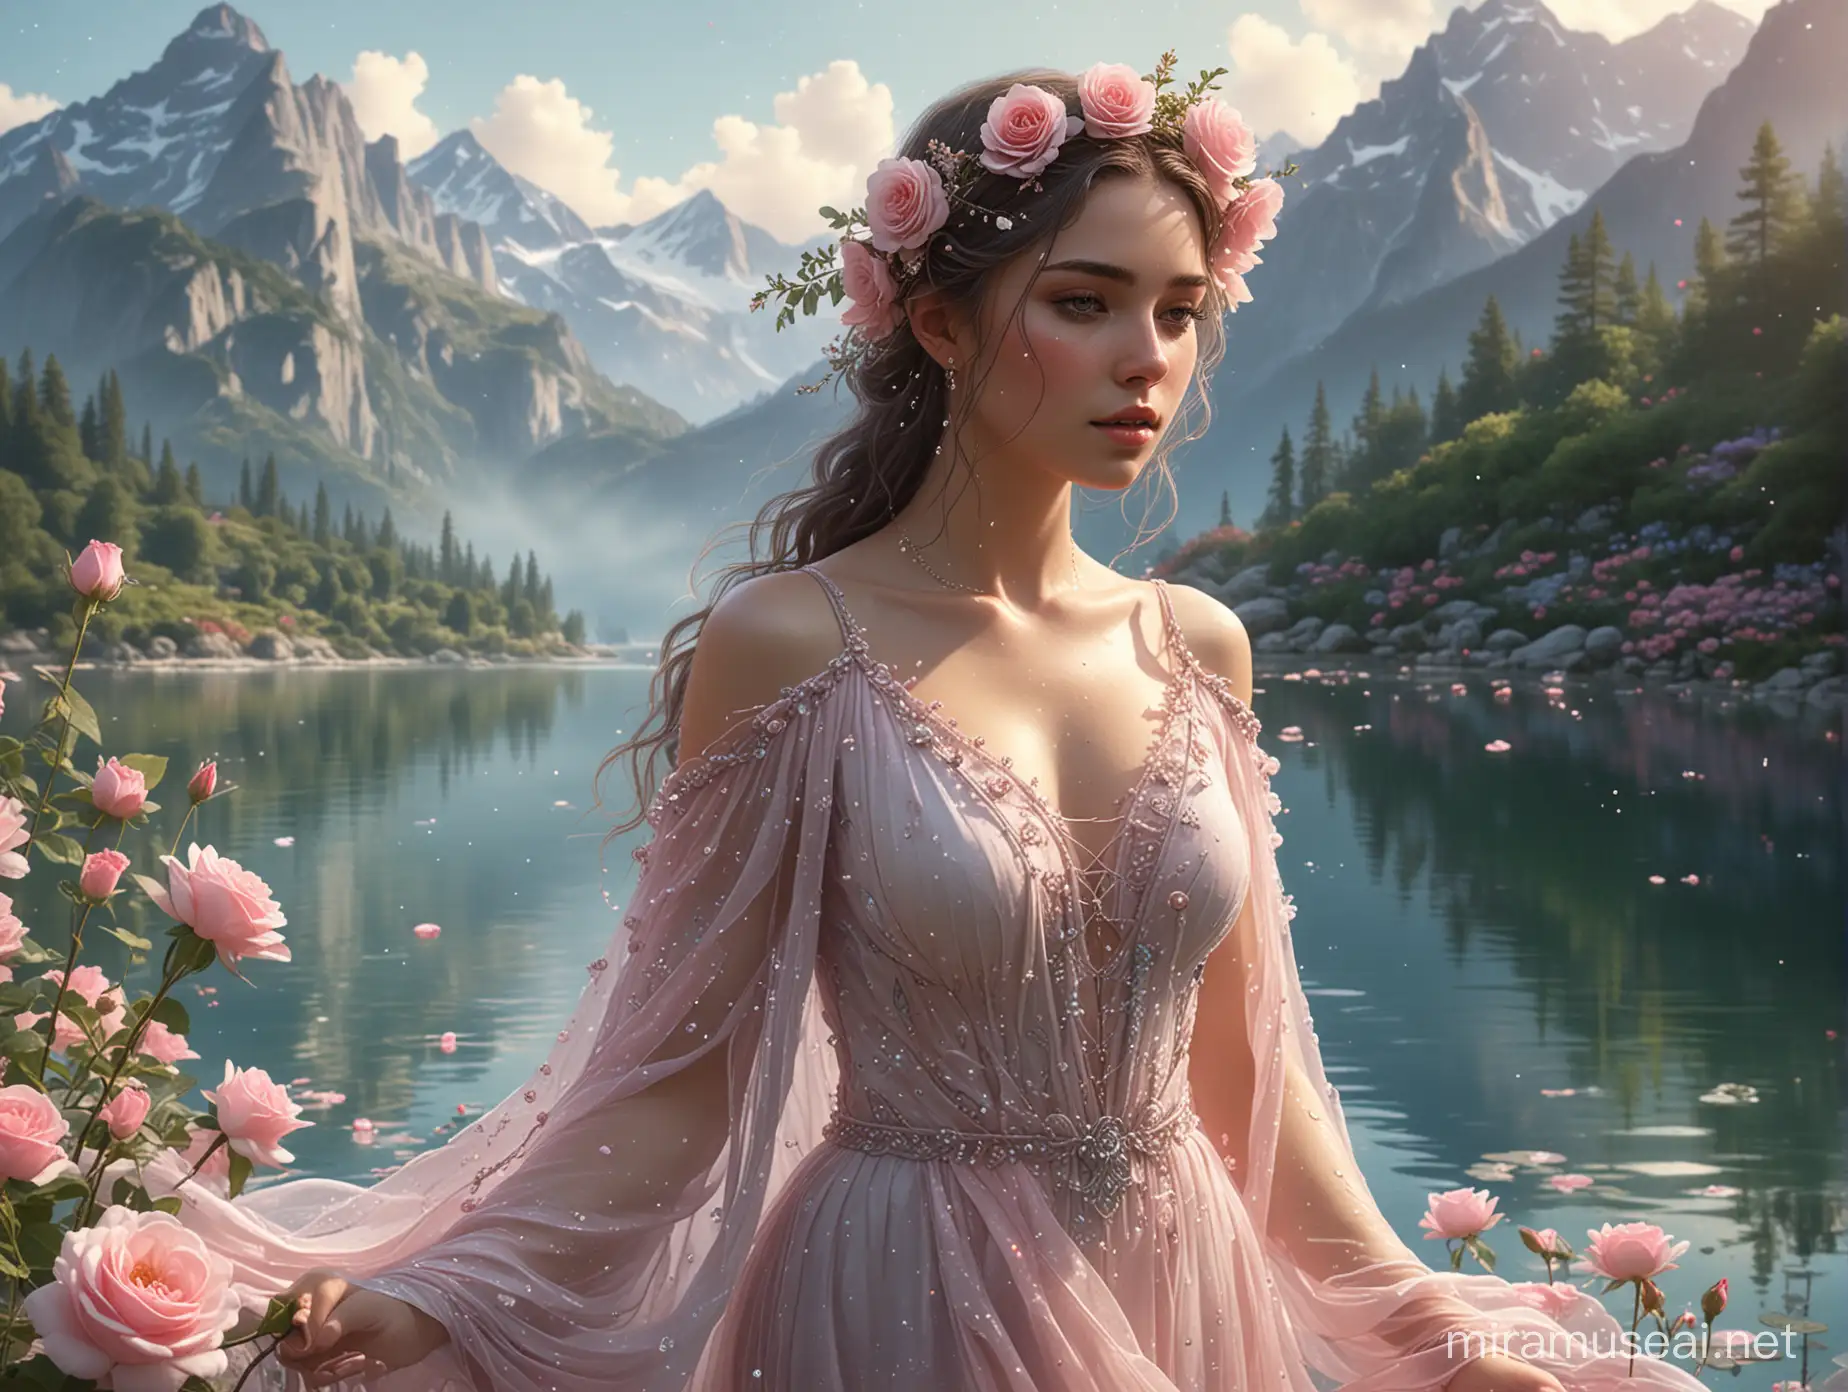 Ethereal Water Nymph Amidst Serene Mountain Lake